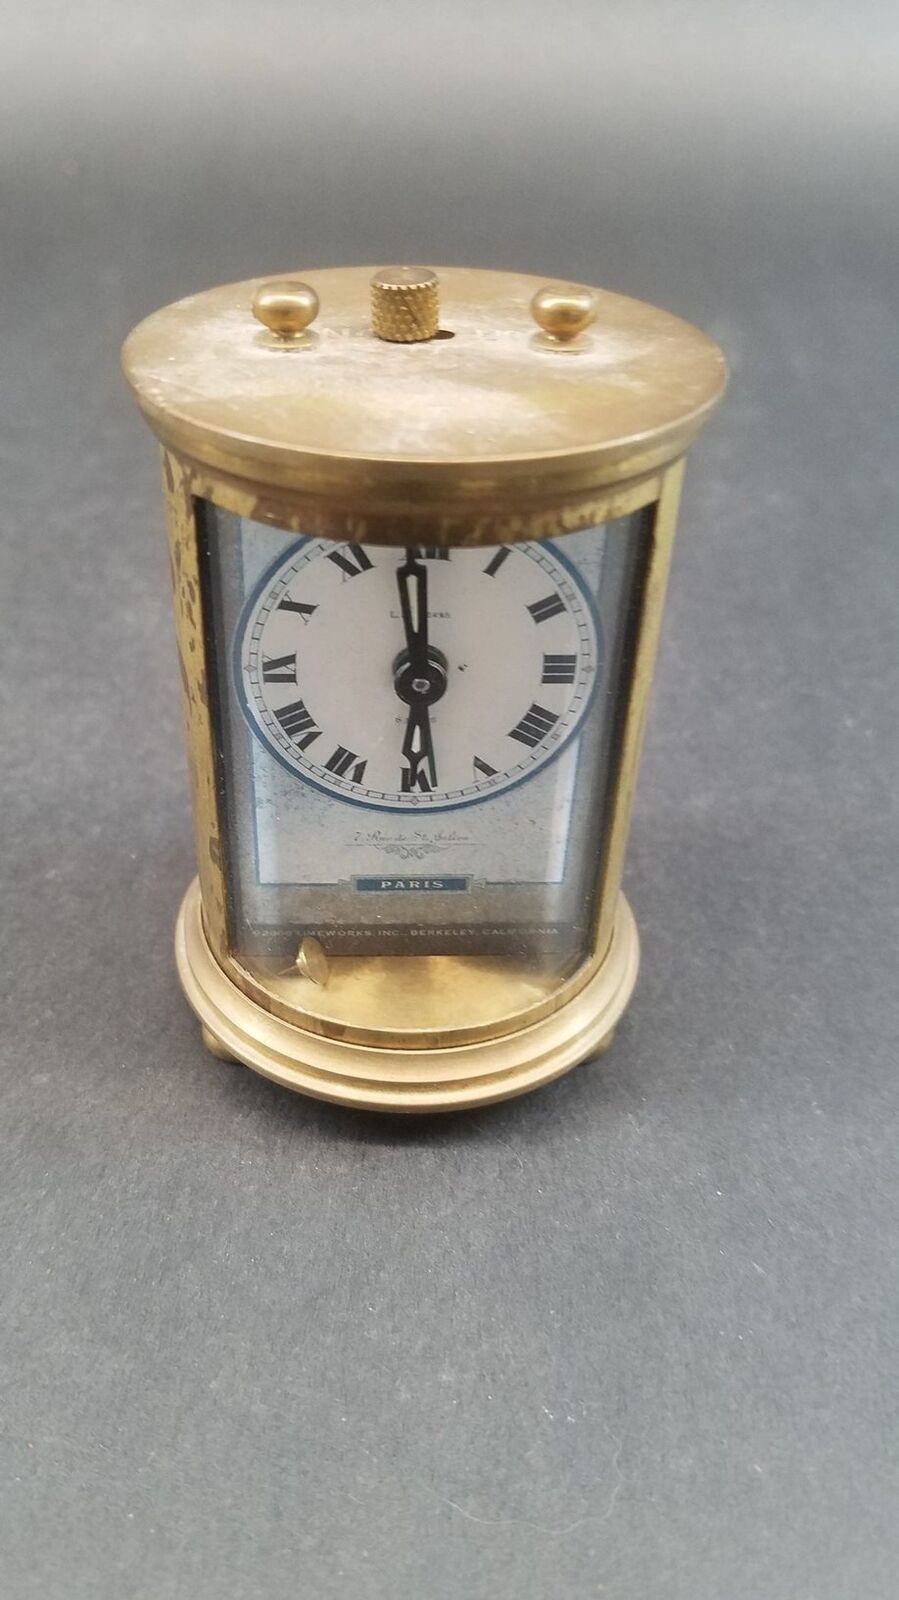 Timeworks Miniature Brass Clock - (pin Fell Out Of Clock Face)